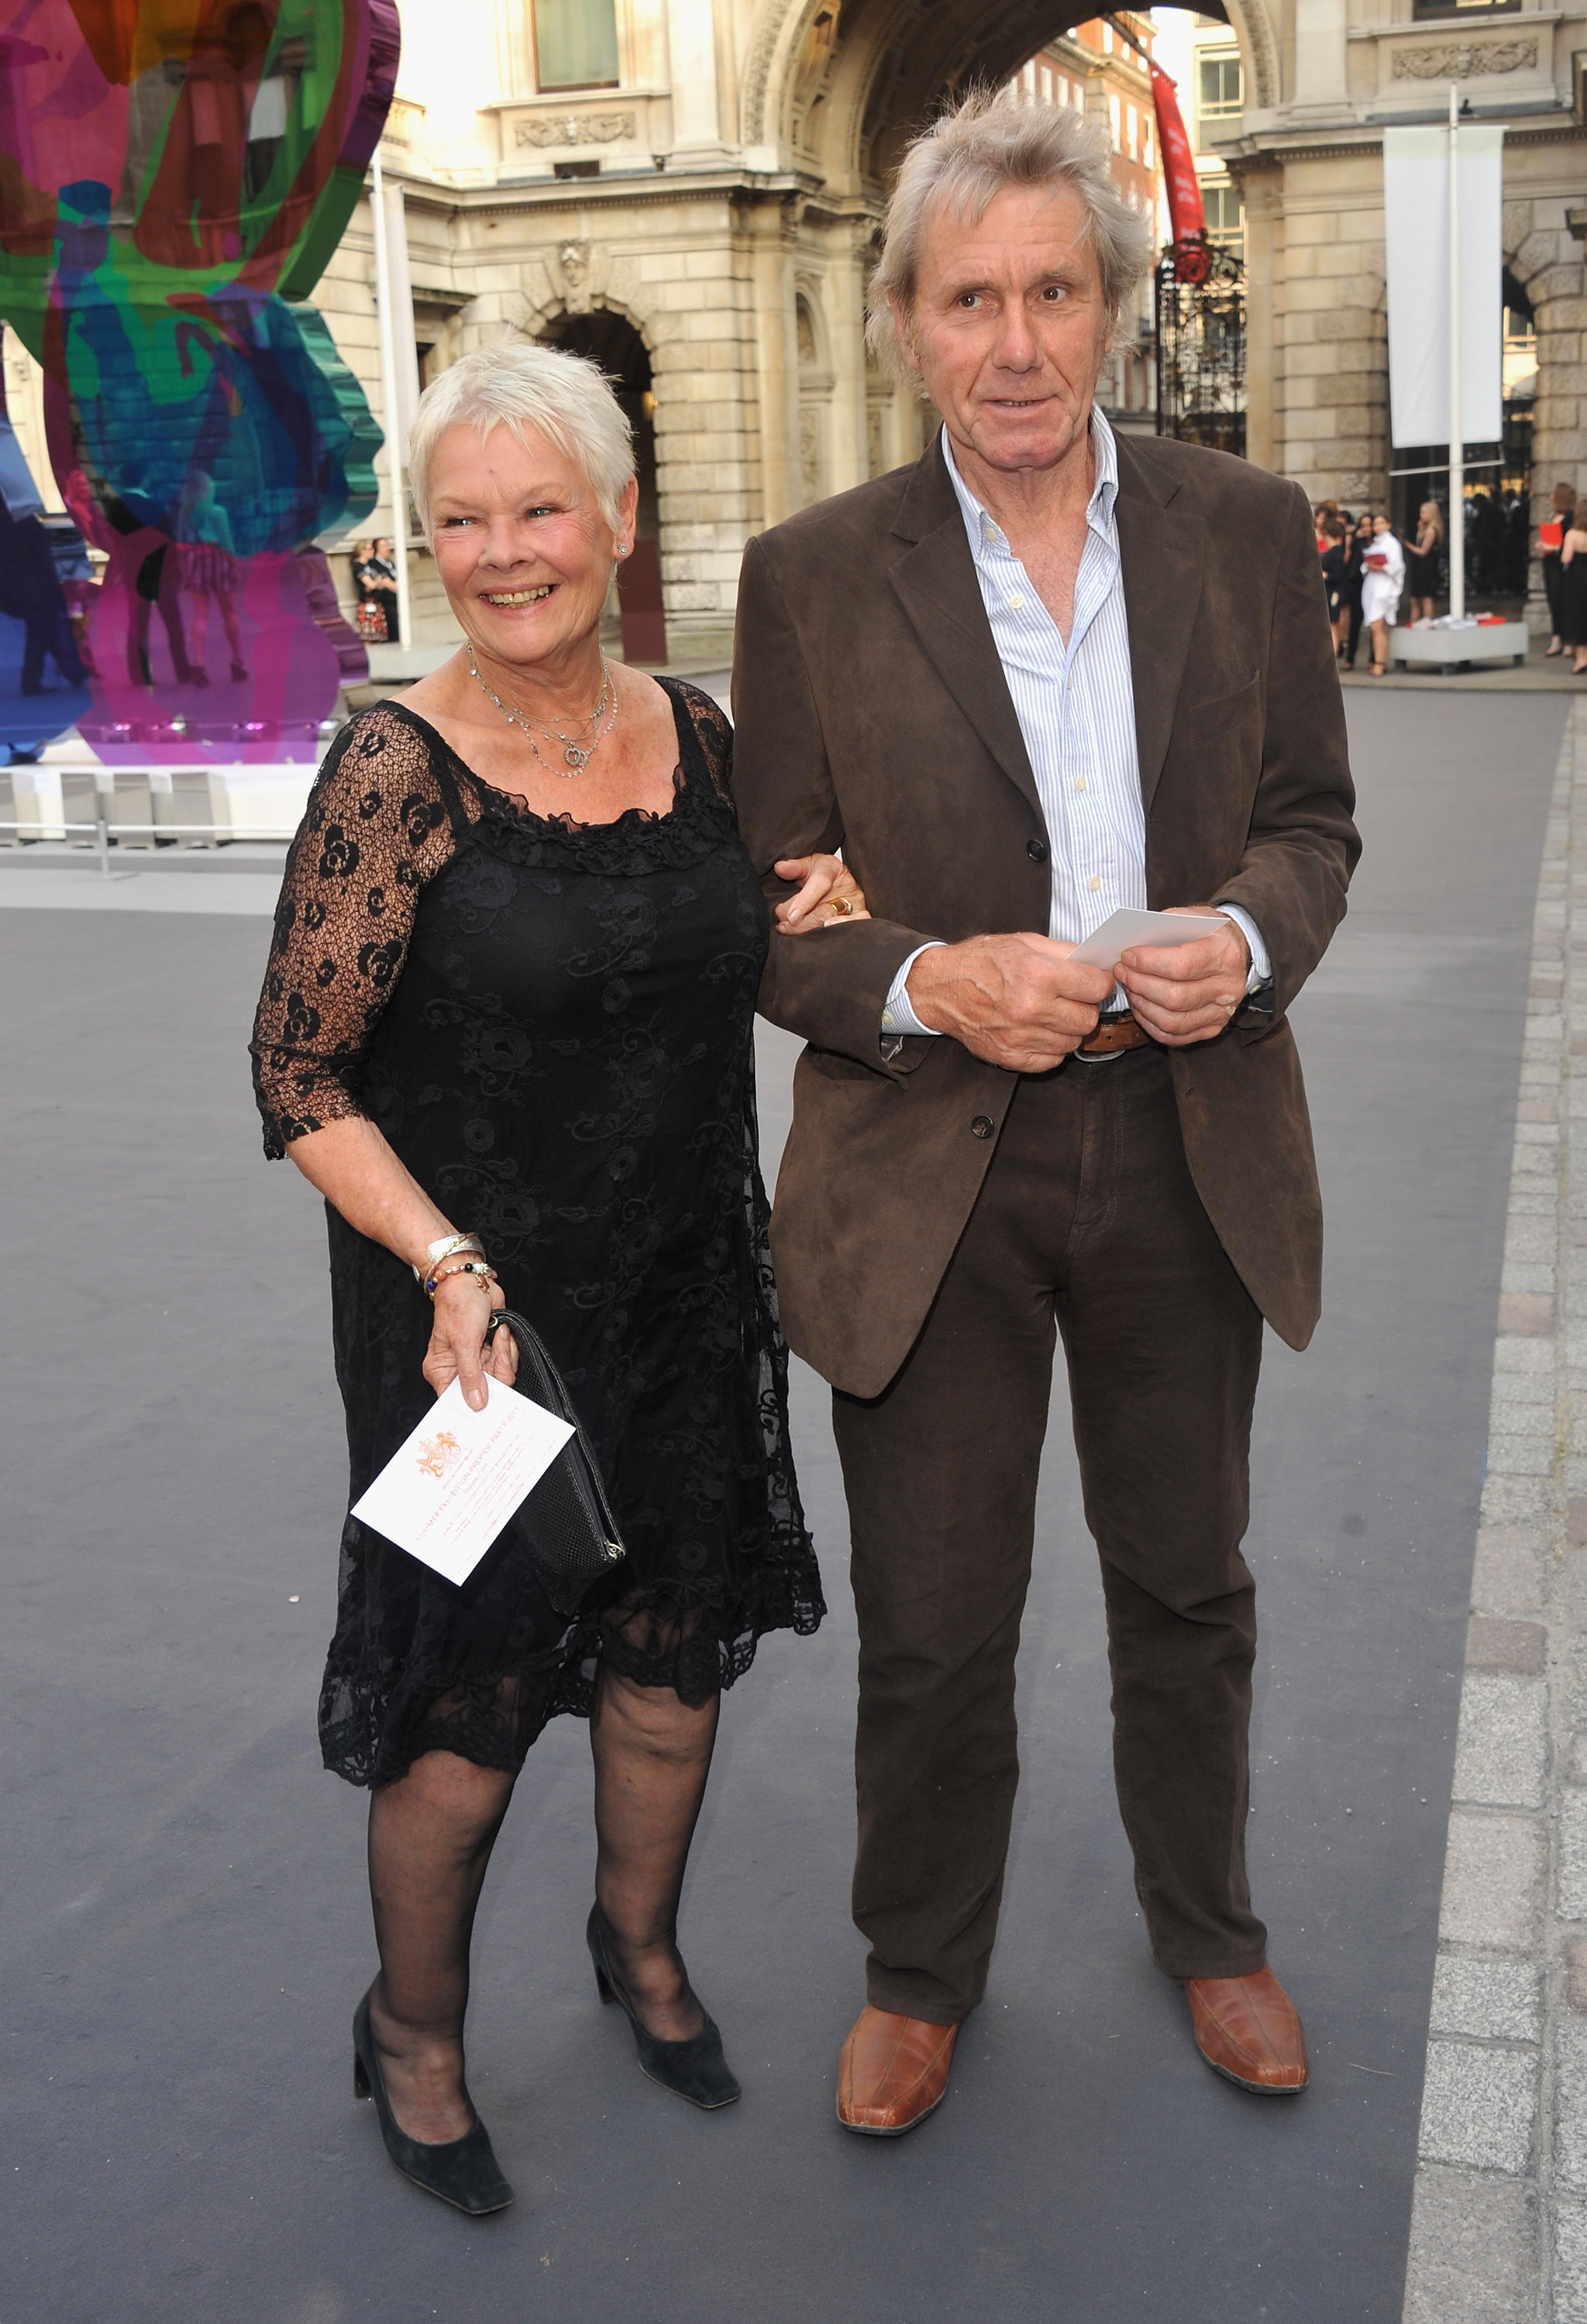 Dame Judi Dench and David Mills attends The Royal Academy of Arts Summer Exhibition Preview Party held the at Royal Academy of Arts on June 2, 2011 in London, England. | Source: Getty Images